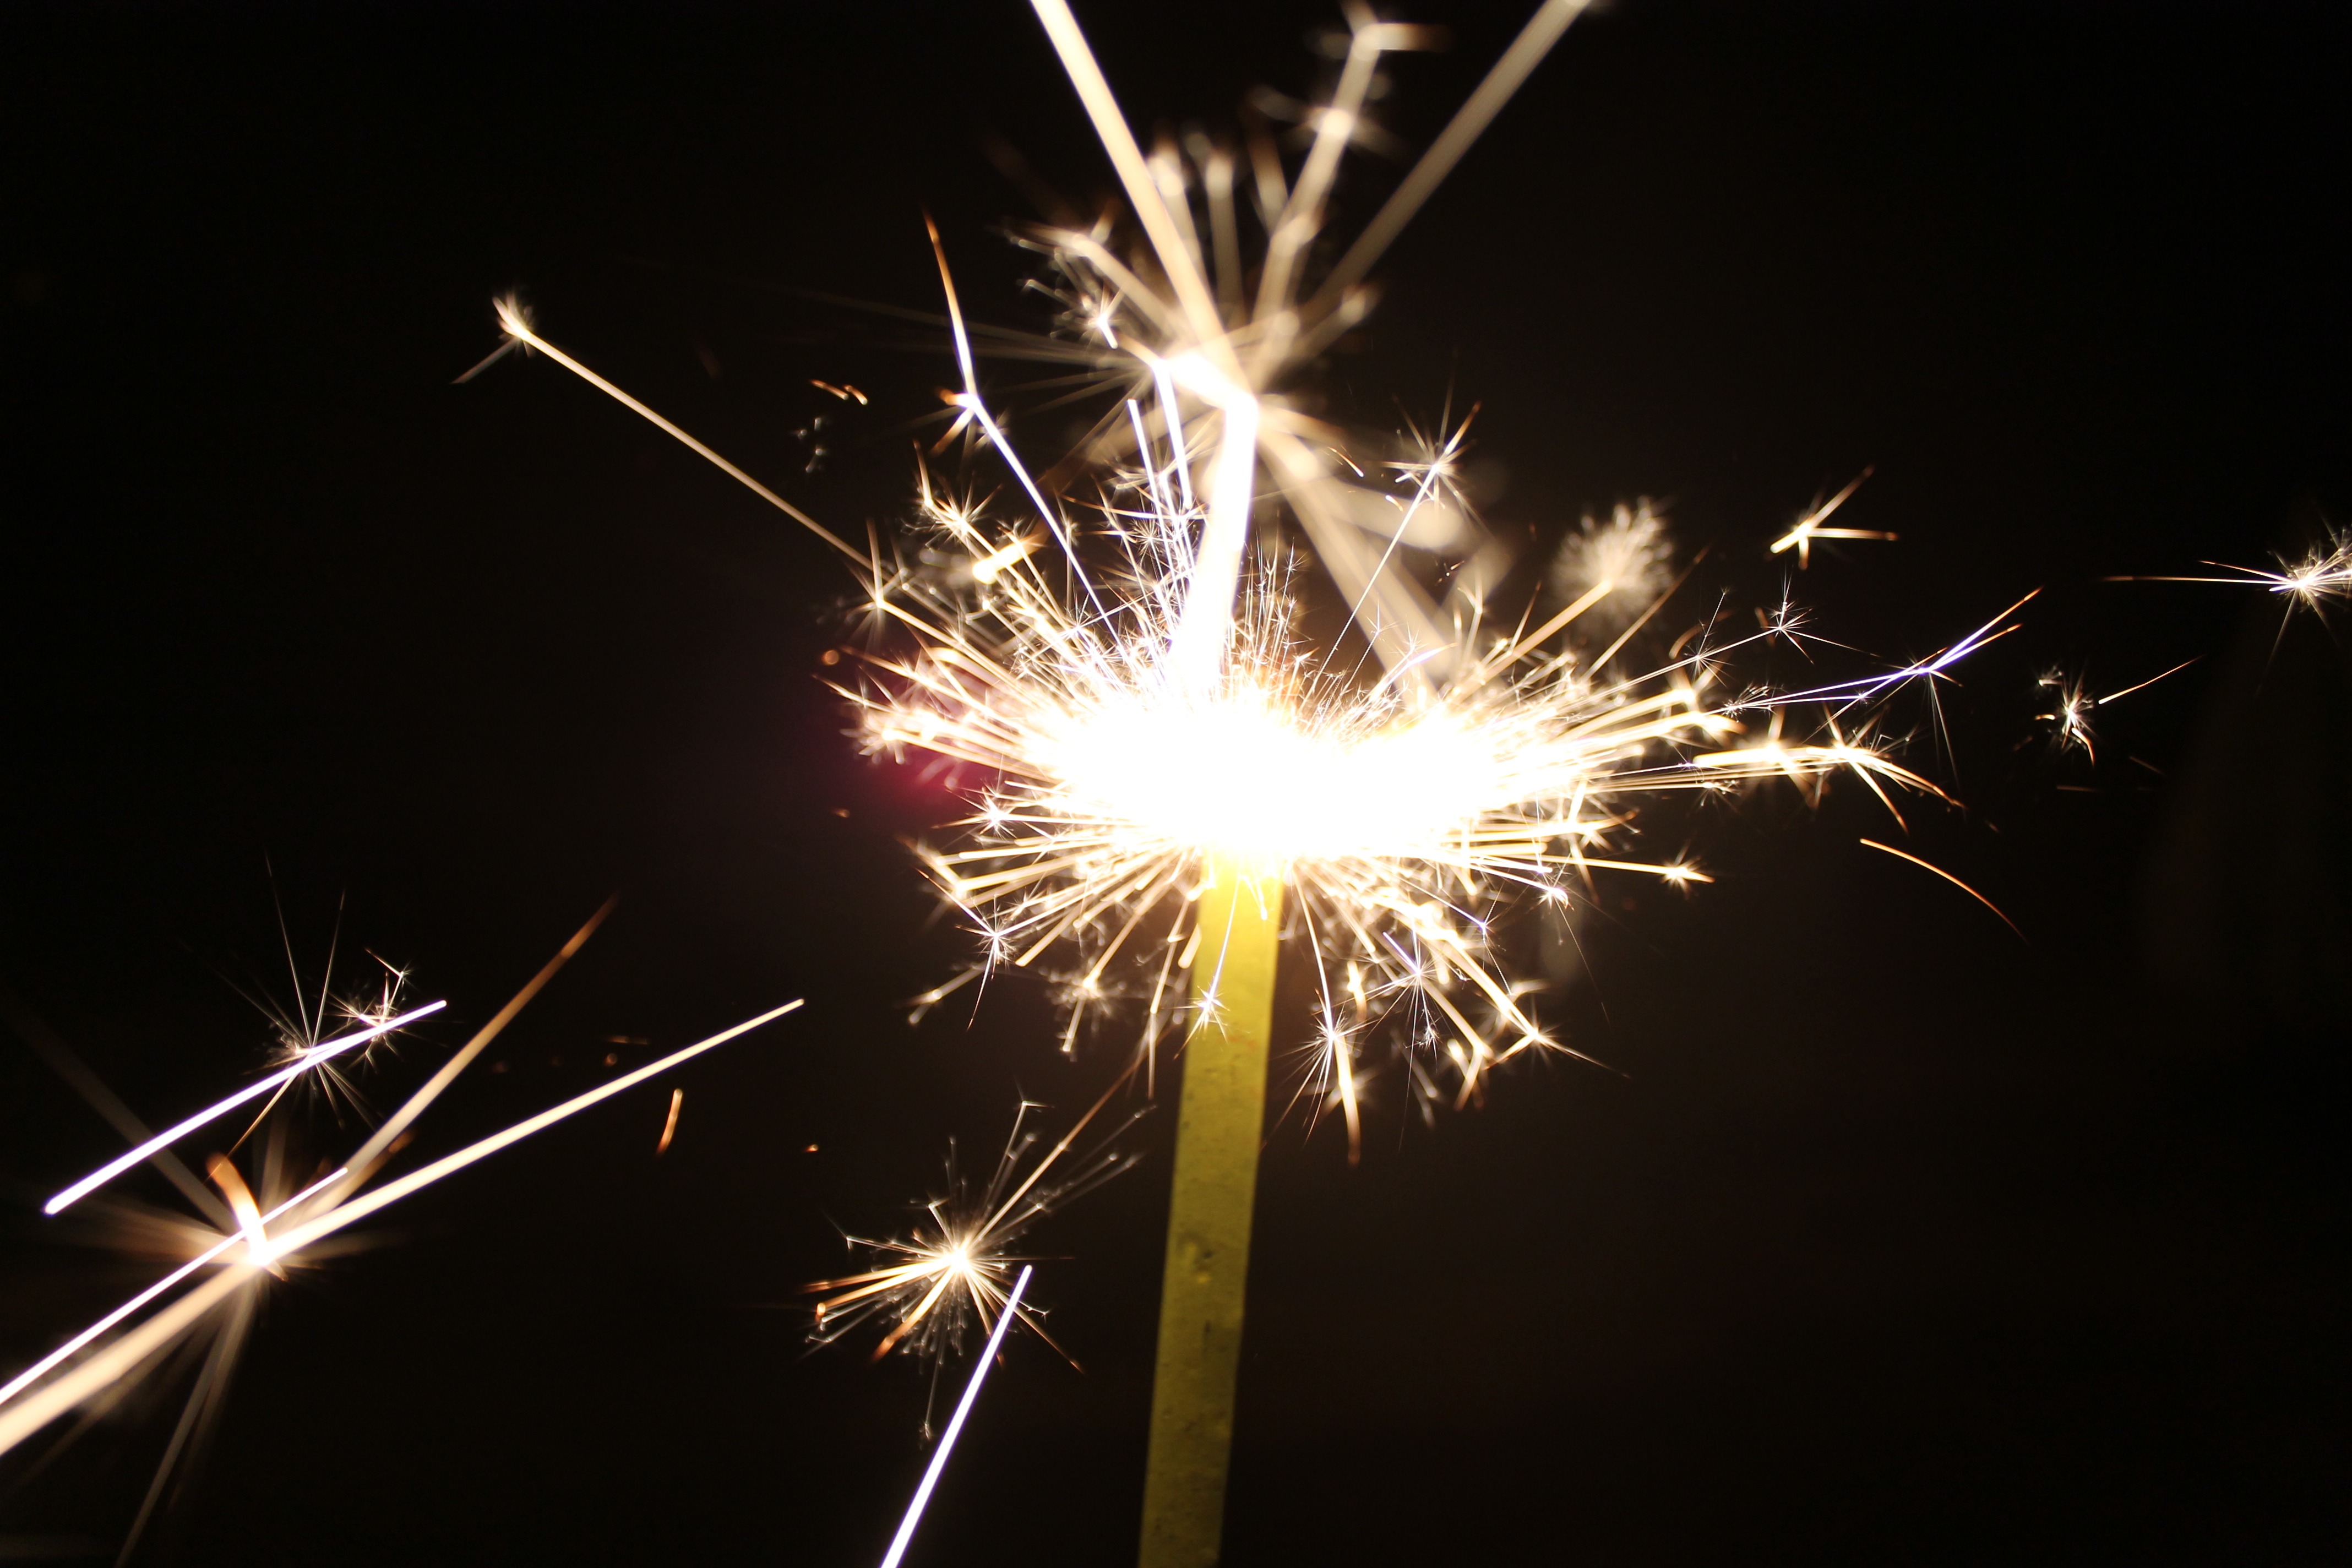 Free Images : light, glowing, night, flower, sparkler, colourful ...